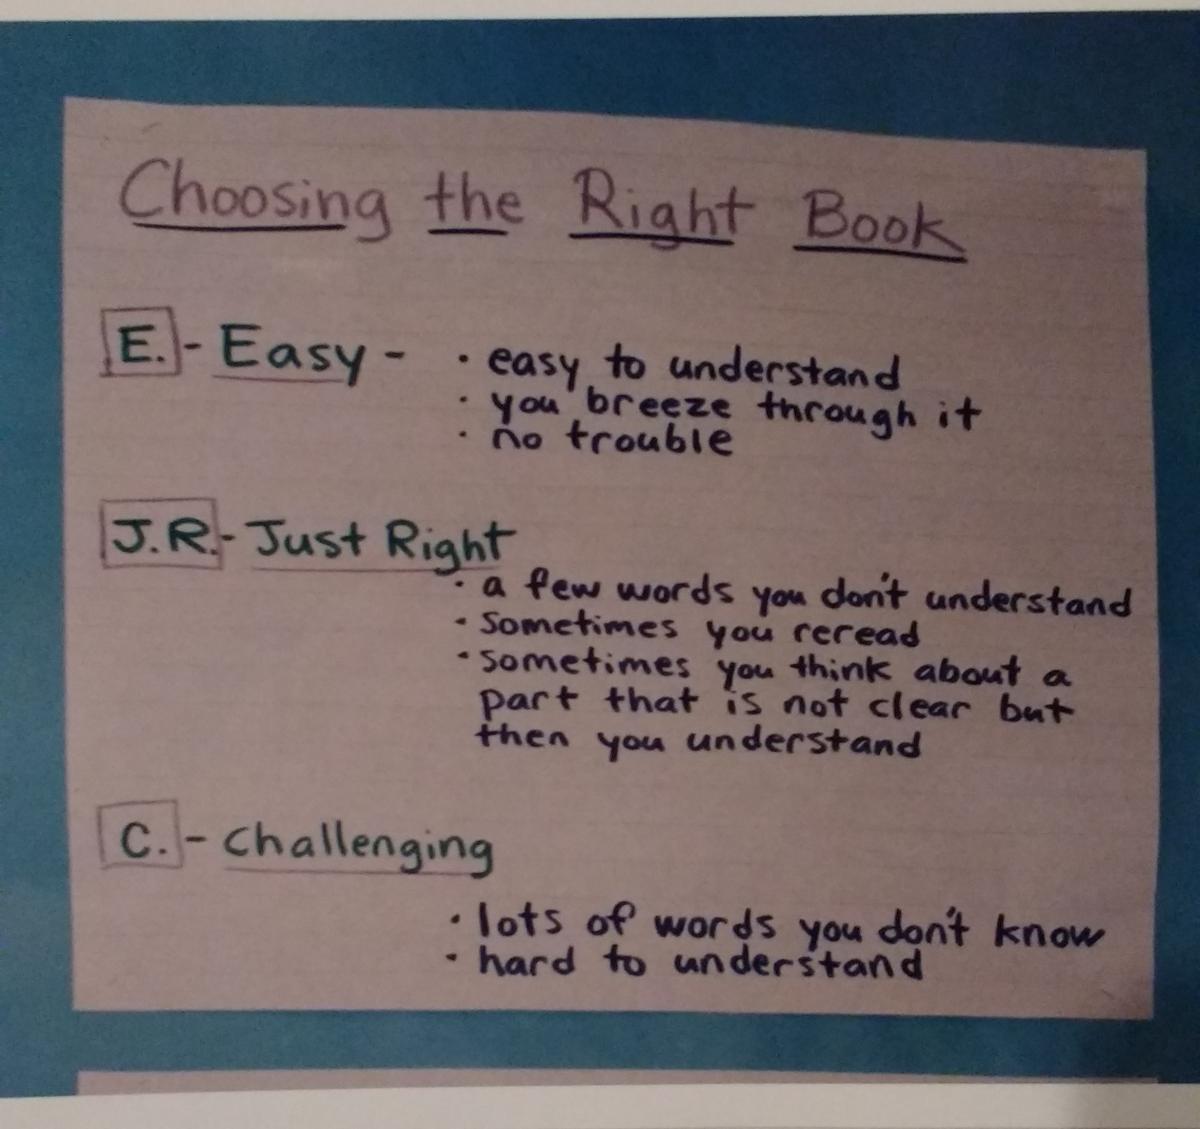 This chart includes "understand" as a focus. We want our students to read and make meaning. It's okay to also read easy and challenging books. Avoid using "too" easy and "too" challenging